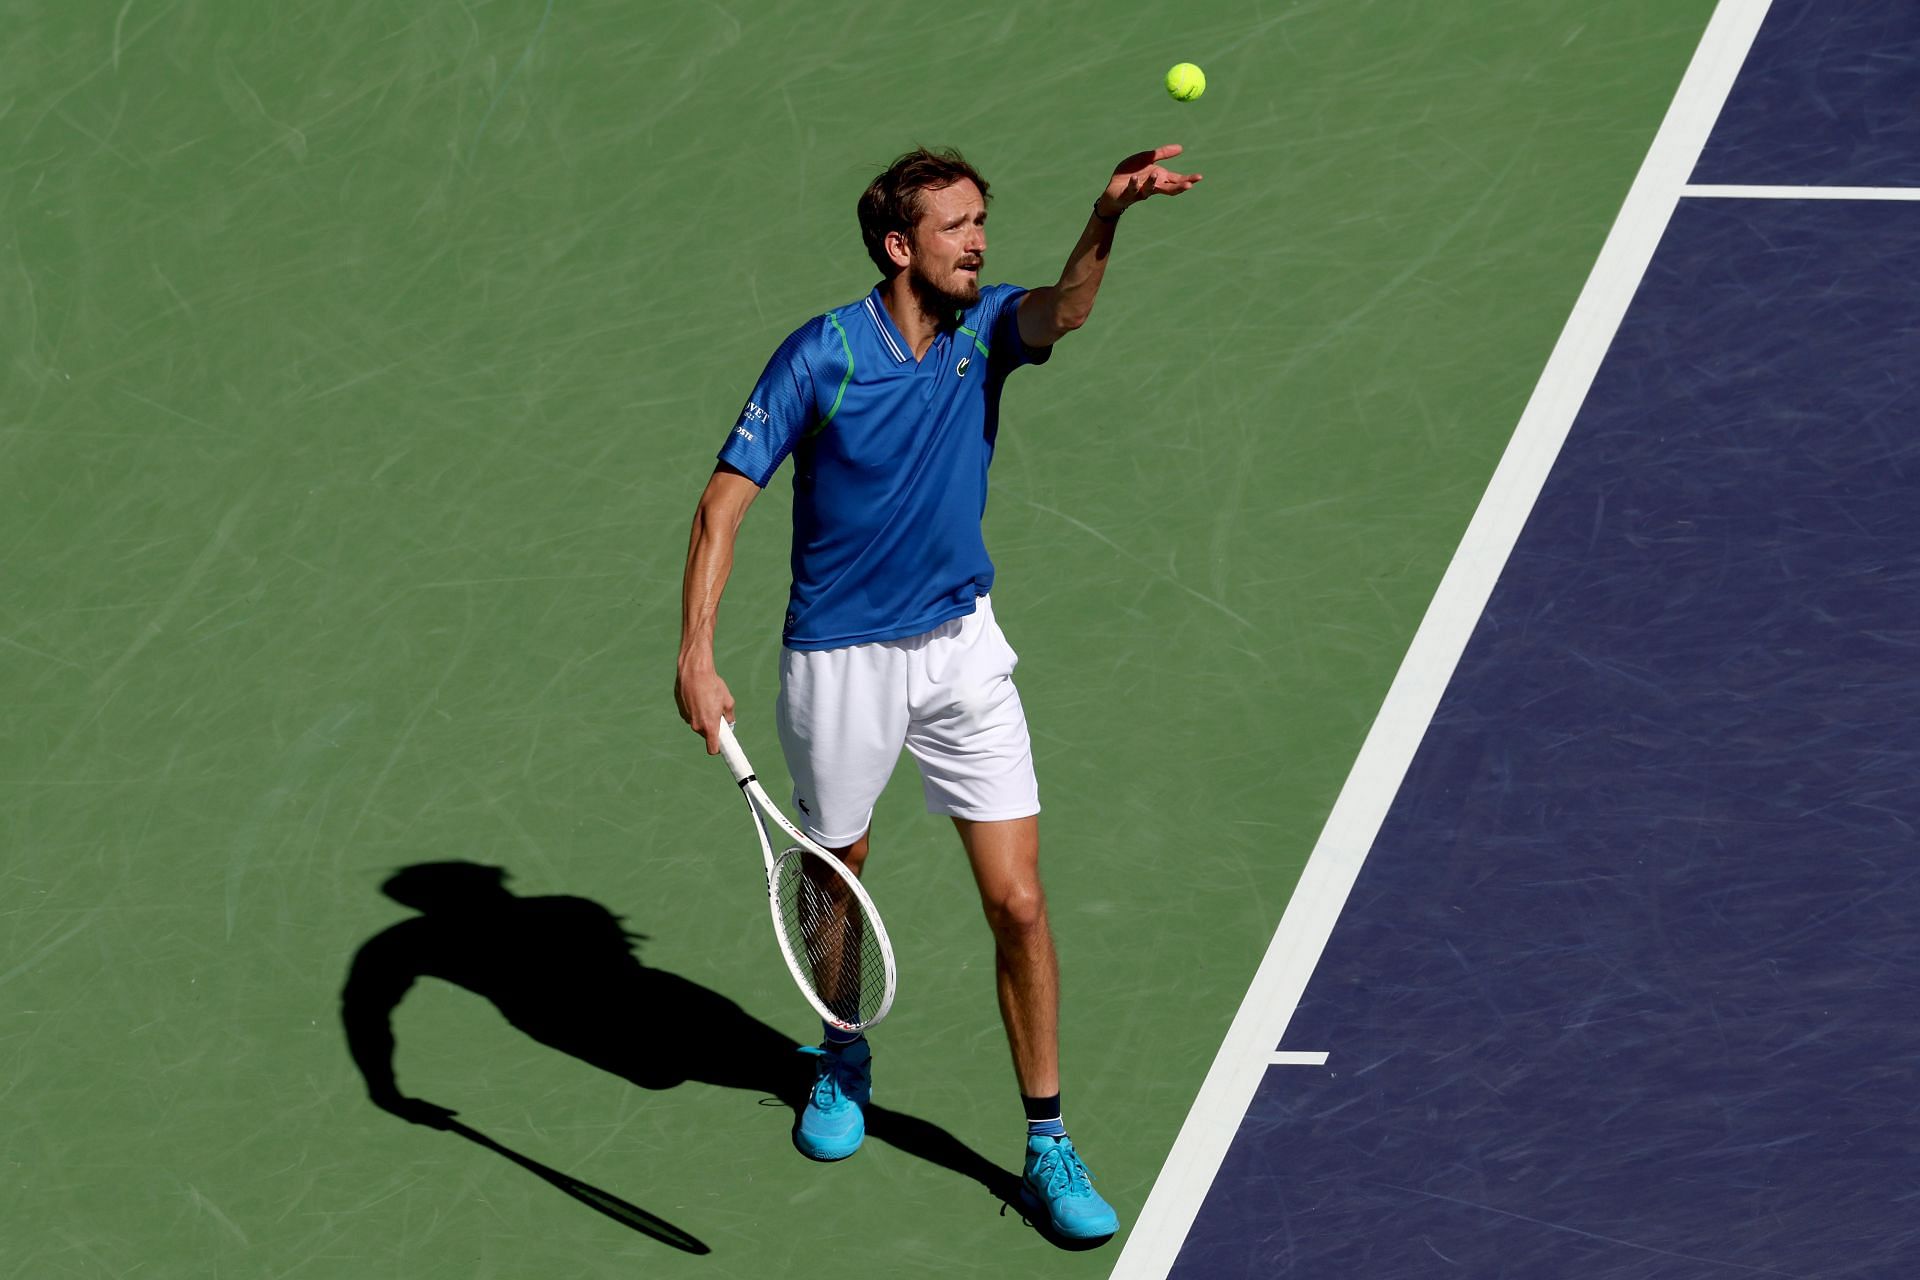 Daniil Medvedev in action at the Indian Wells Masters